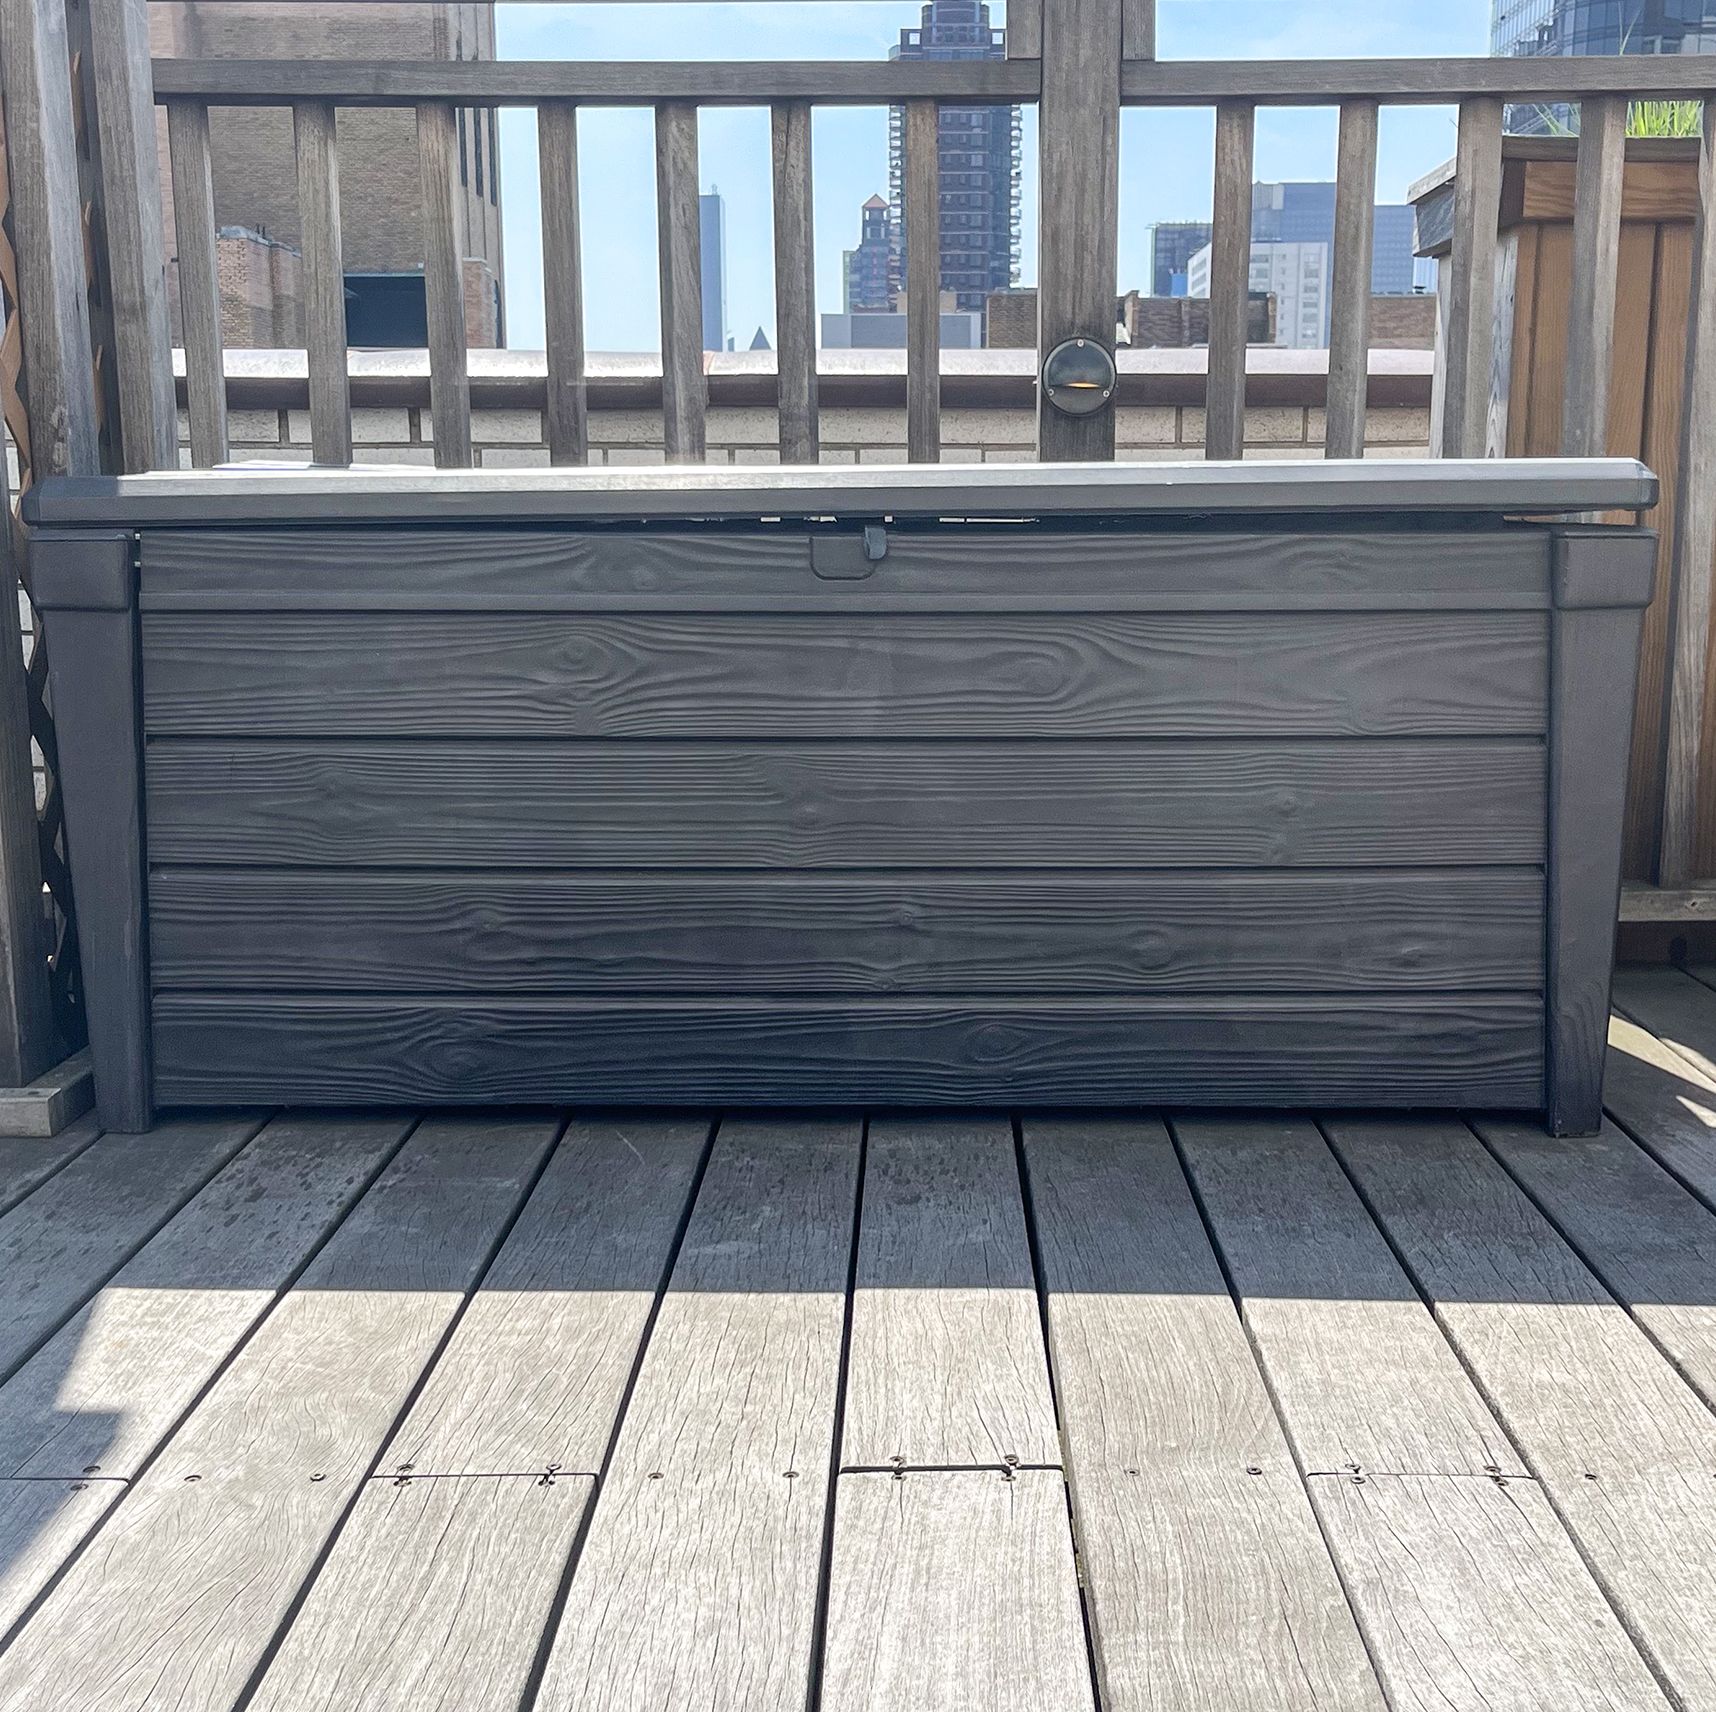 Prepping Your Patio for Summer? These Deck Boxes Neatly Store Outdoor Cushions, Pool Gear, Toys, and More